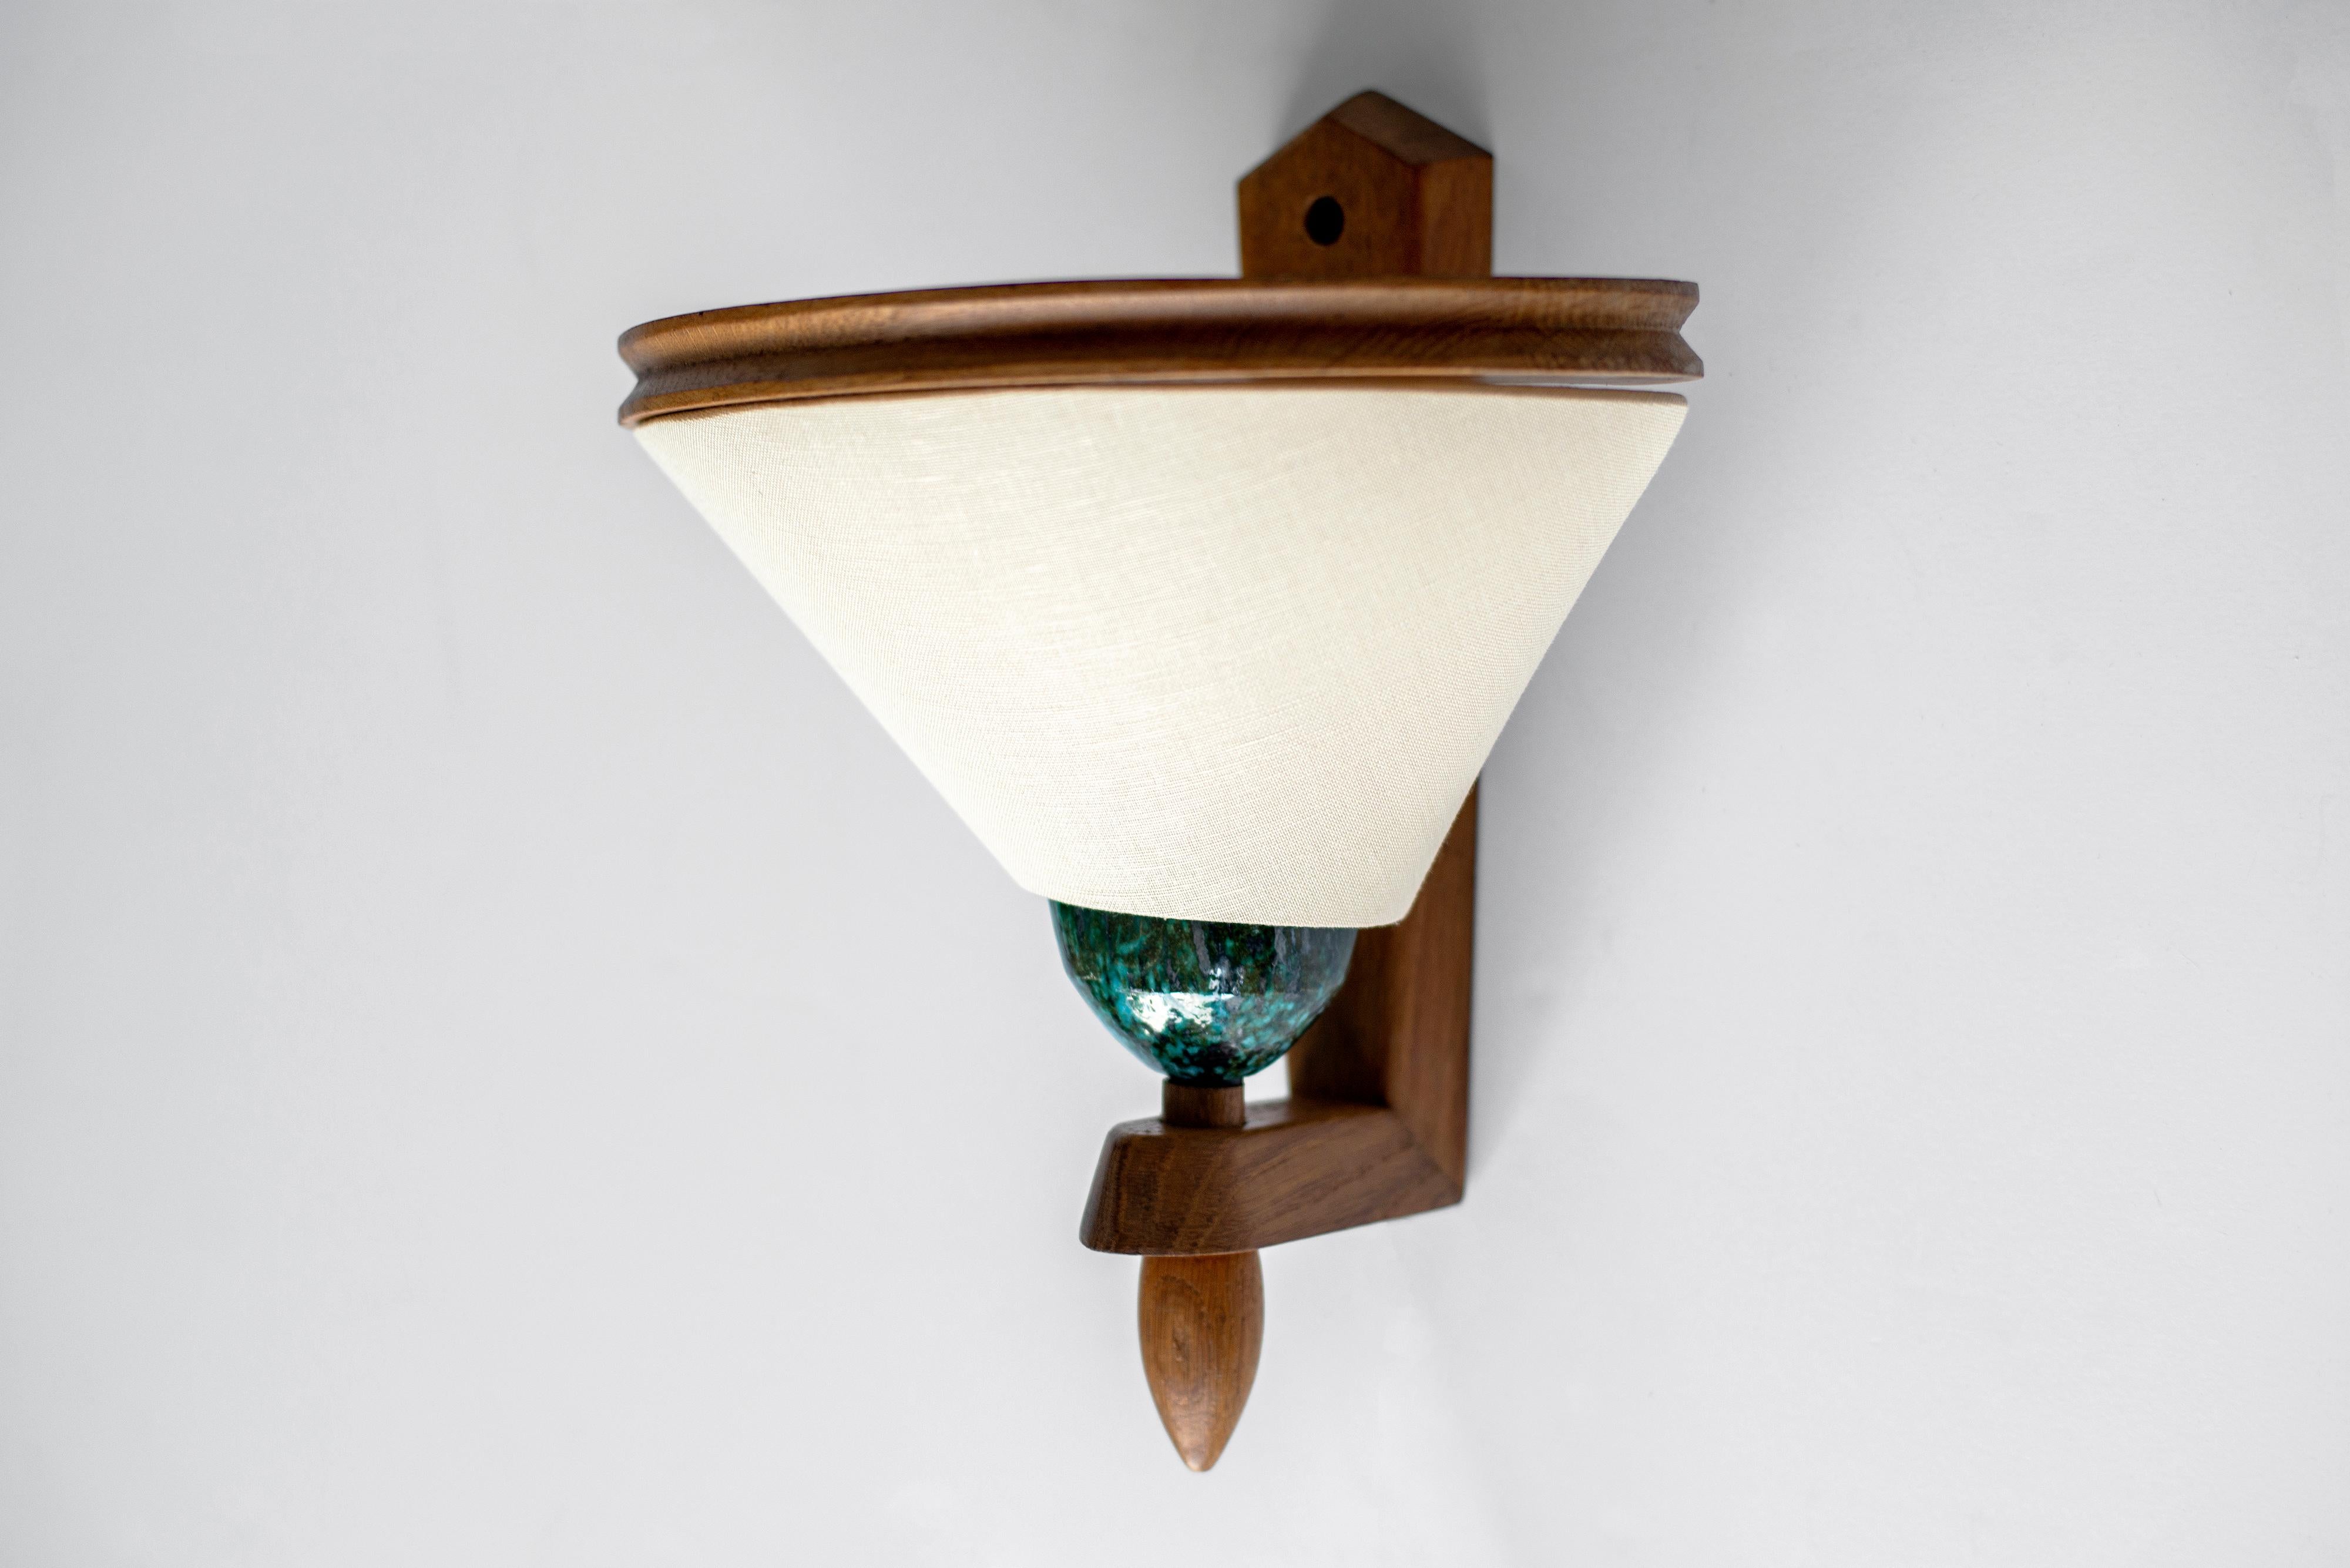 French wall sconce in French oak by Guillerme et Chambron.
Signature teal blue ceramic base with unique design wood ring meeting the new trapezoid shaped shade.
Professionally newly rewired.